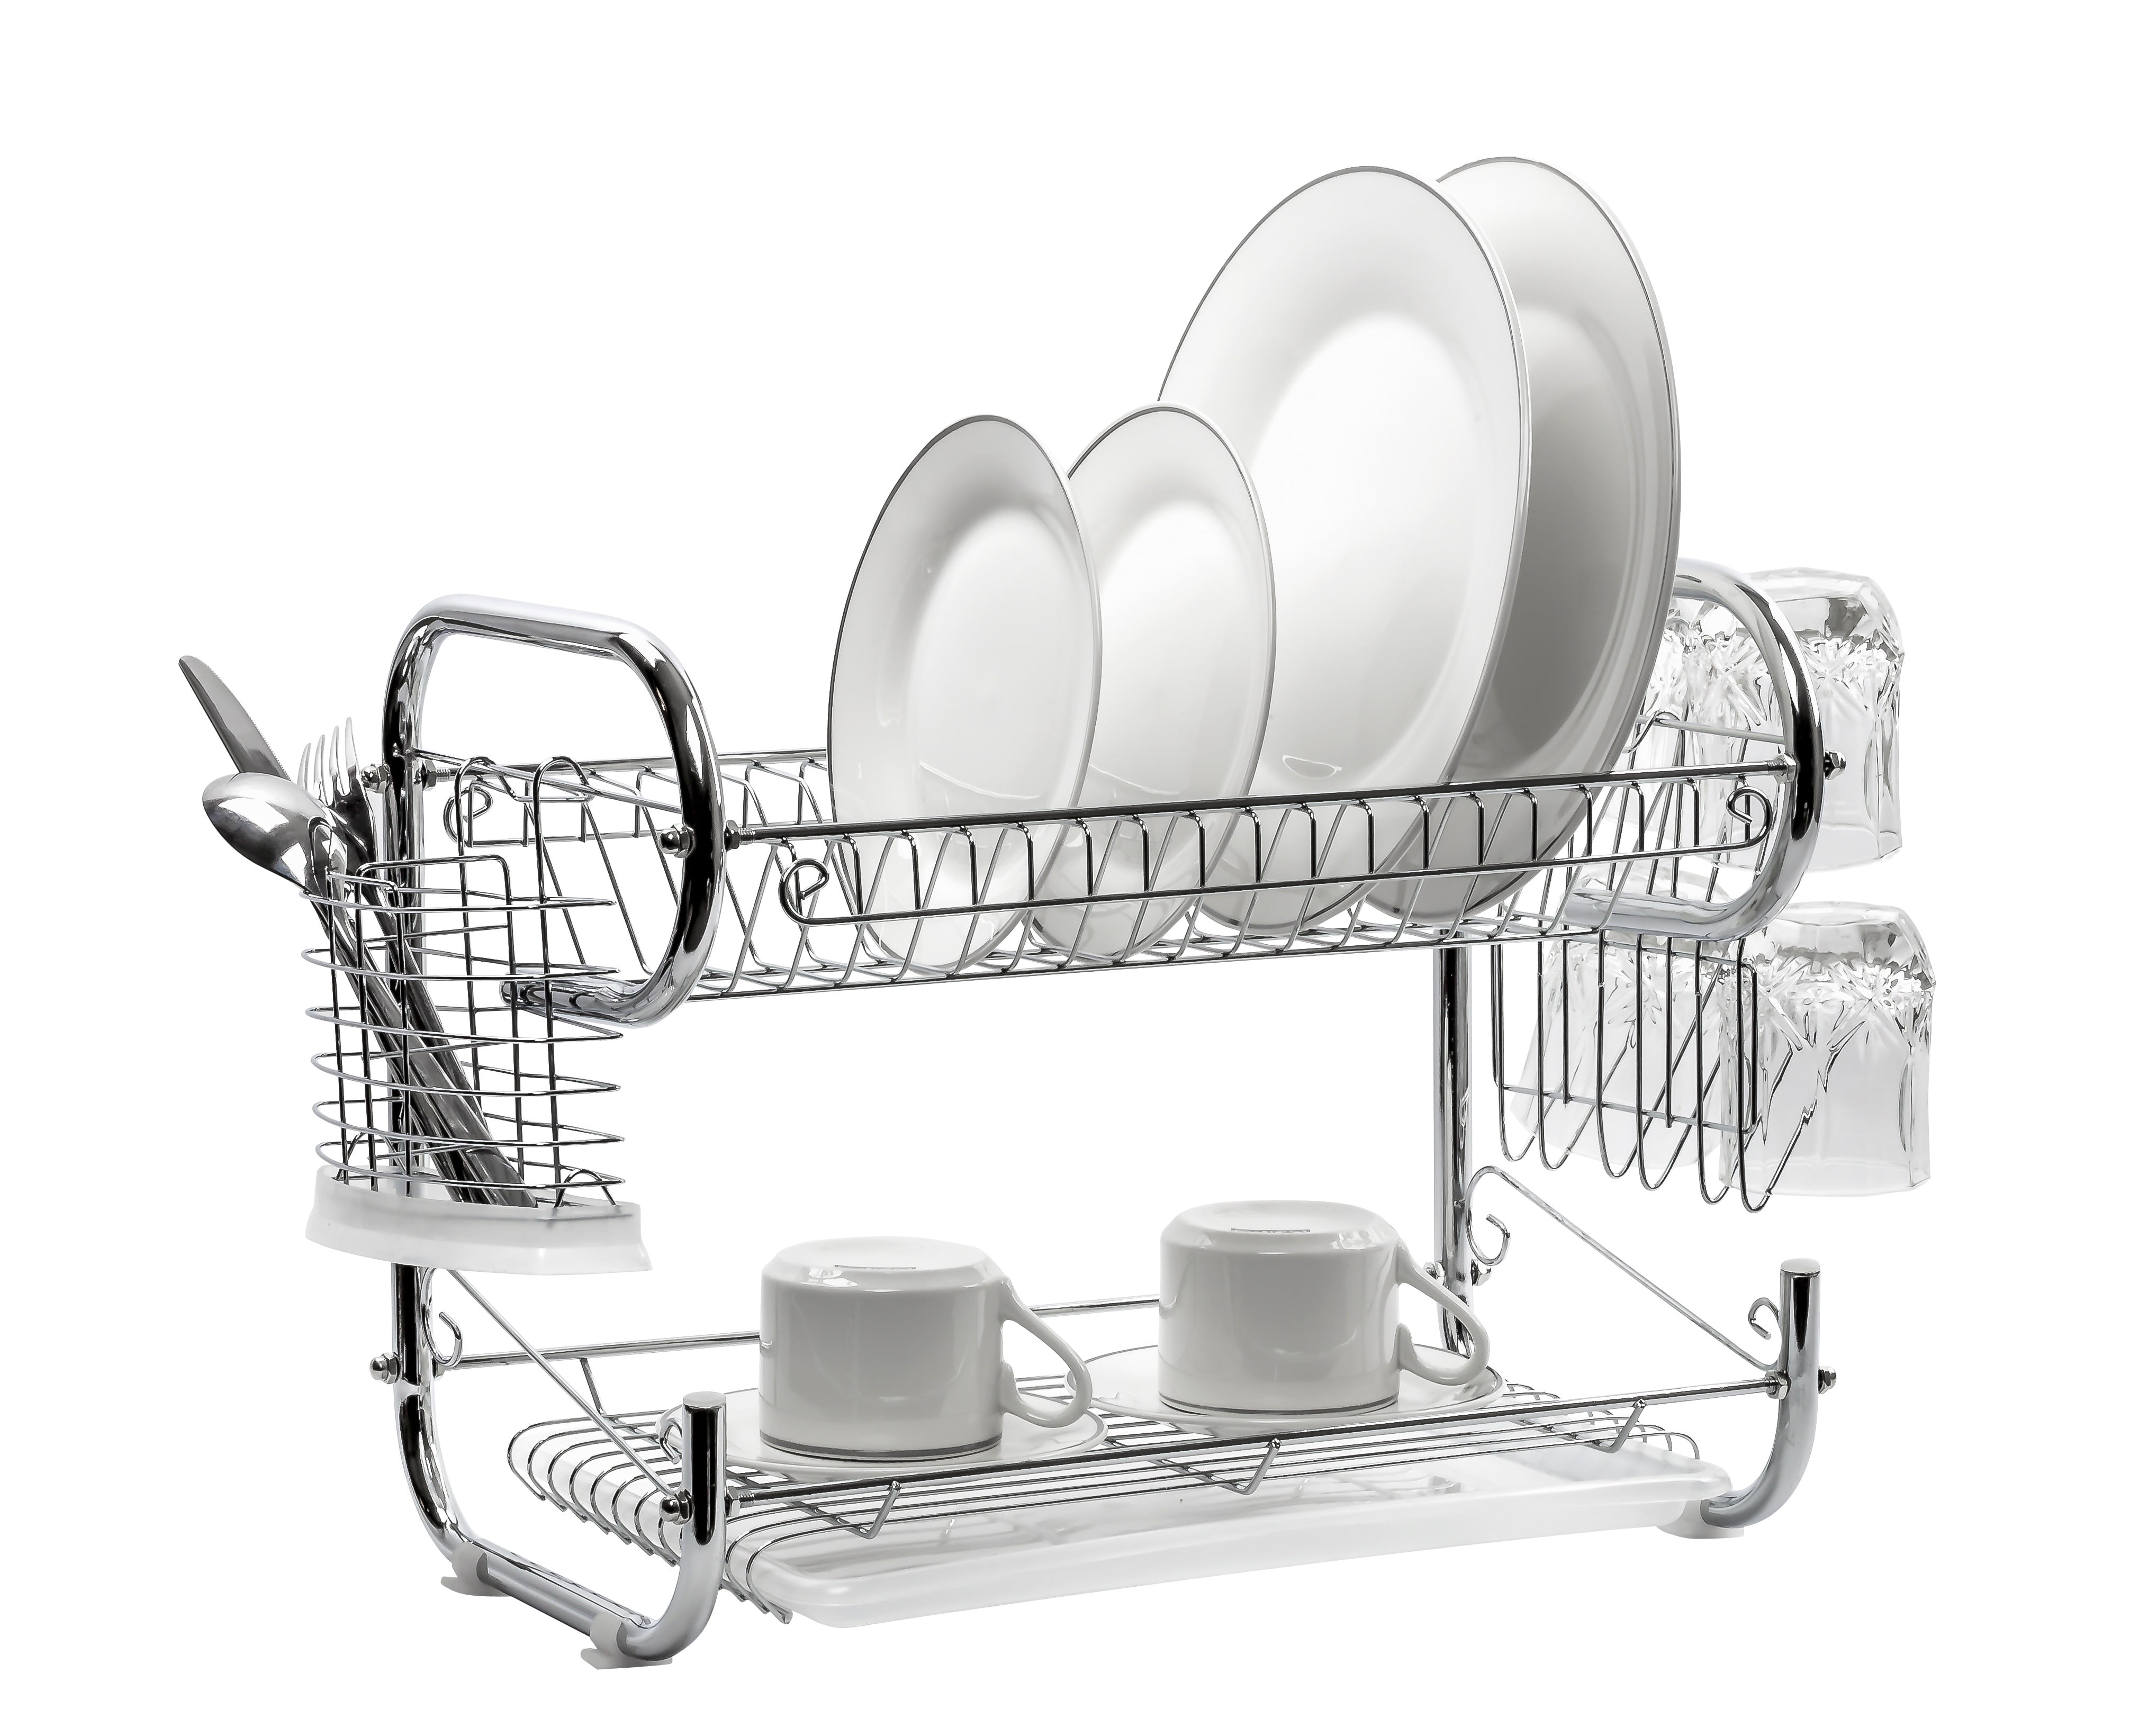 HHXRISE Dish Drying Rack, 2 Tier Large Dish Rack and Drainboard Set for  Kitchen counter, Large Stainless Steel Dish Dryer with Detachabl